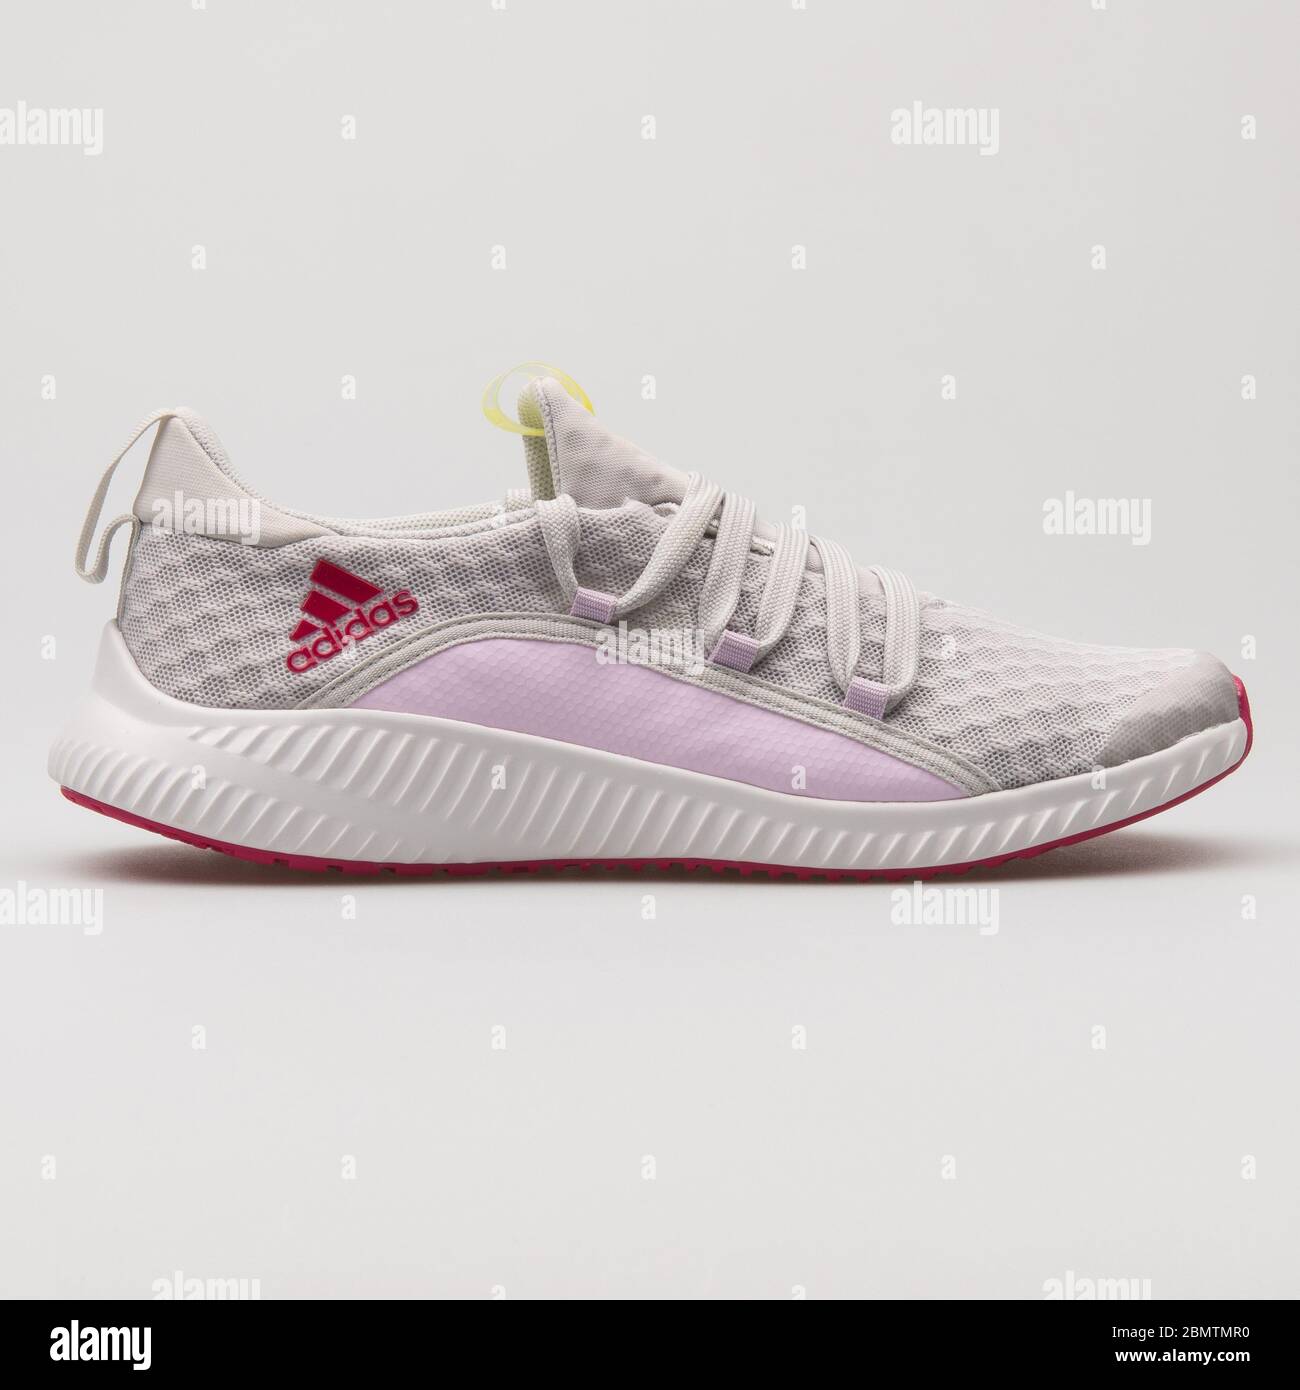 VIENNA, AUSTRIA - FEBRUARY 19, 2018: Adidas FortaRun X Cool grey and pink  sneaker on white background Stock Photo - Alamy